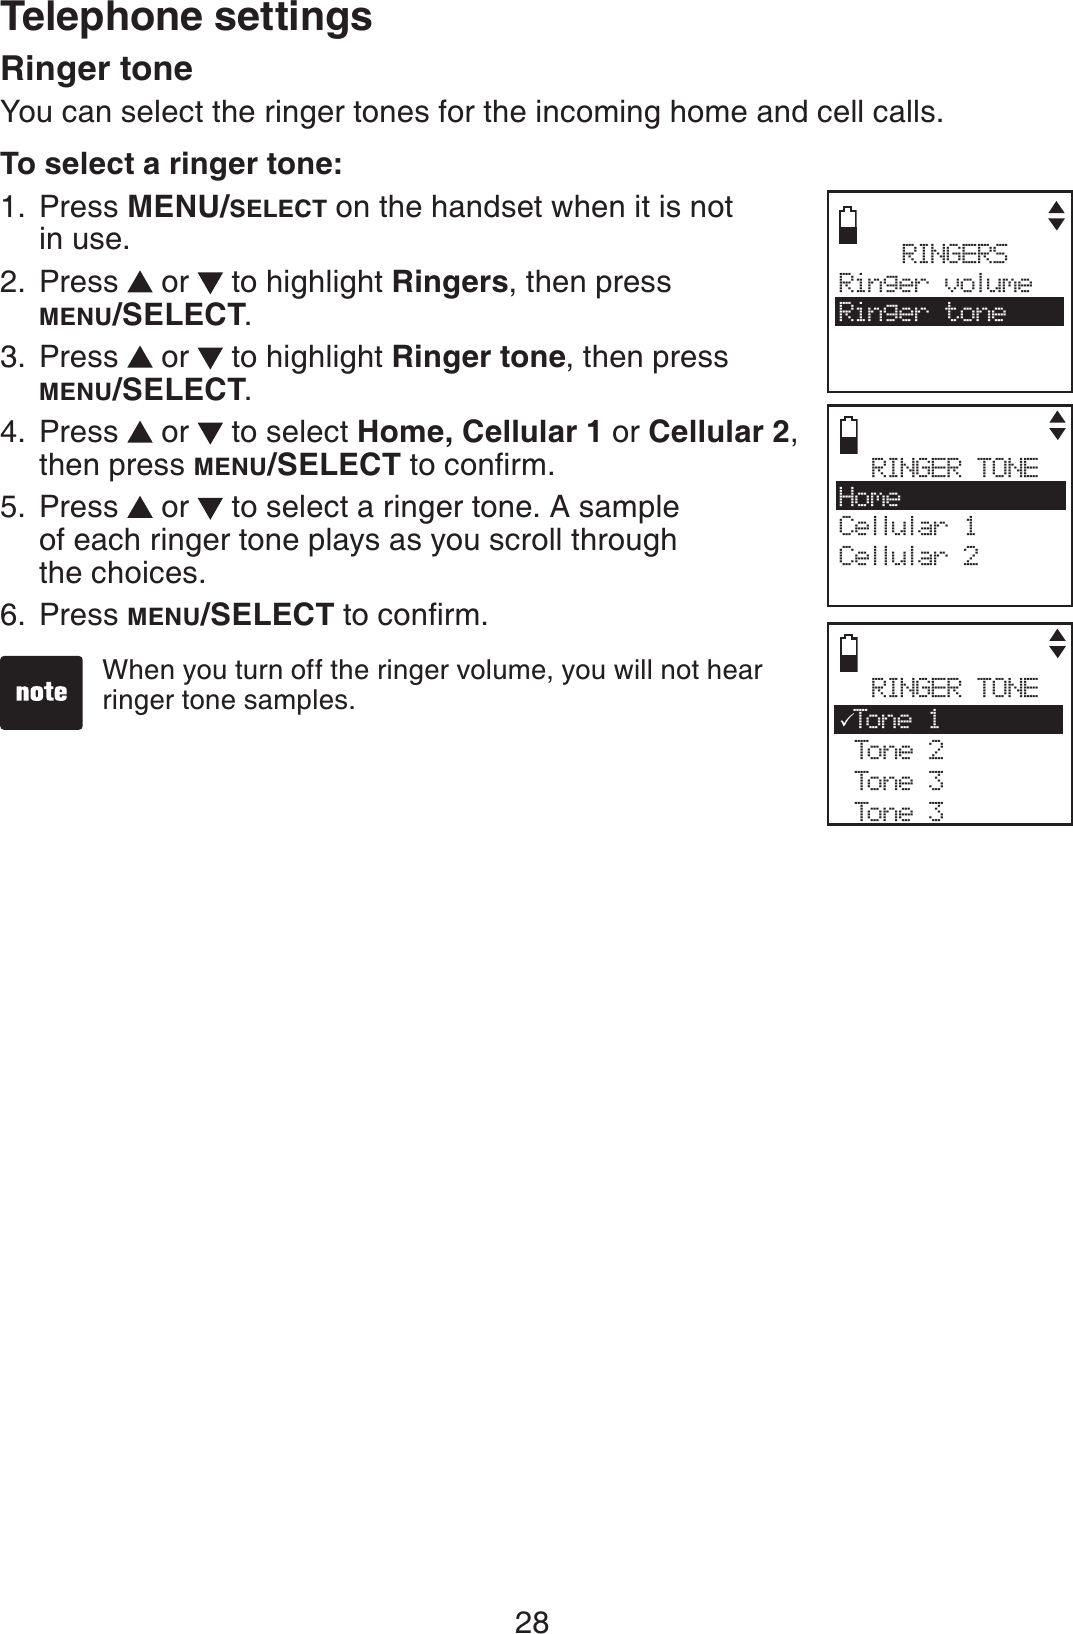 28Telephone settingsRinger toneYou can select the ringer tones for the incoming home and cell calls.To select a ringer tone:Press MENU/SELECT on the handset when it is not in use.Press   or   to highlight Ringers, then press MENU/SELECT.Press   or   to highlight Ringer tone, then press MENU/SELECT.Press   or   to select Home, Cellular 1 or Cellular 2,then press MENU/SELECTVQEQPſTOPress   or   to select a ringer tone. A sample of each ringer tone plays as you scroll through the choices.Press MENU/SELECTVQEQPſTO1.2.3.4.5.6.RINGERSRinger volumeRinger toneRINGER TONEHomeCellular 1Cellular 2RINGER TONE3Ton e 1 Tone 2 Tone 3 Tone 3When you turn off the ringer volume, you will not hear ringer tone samples. 